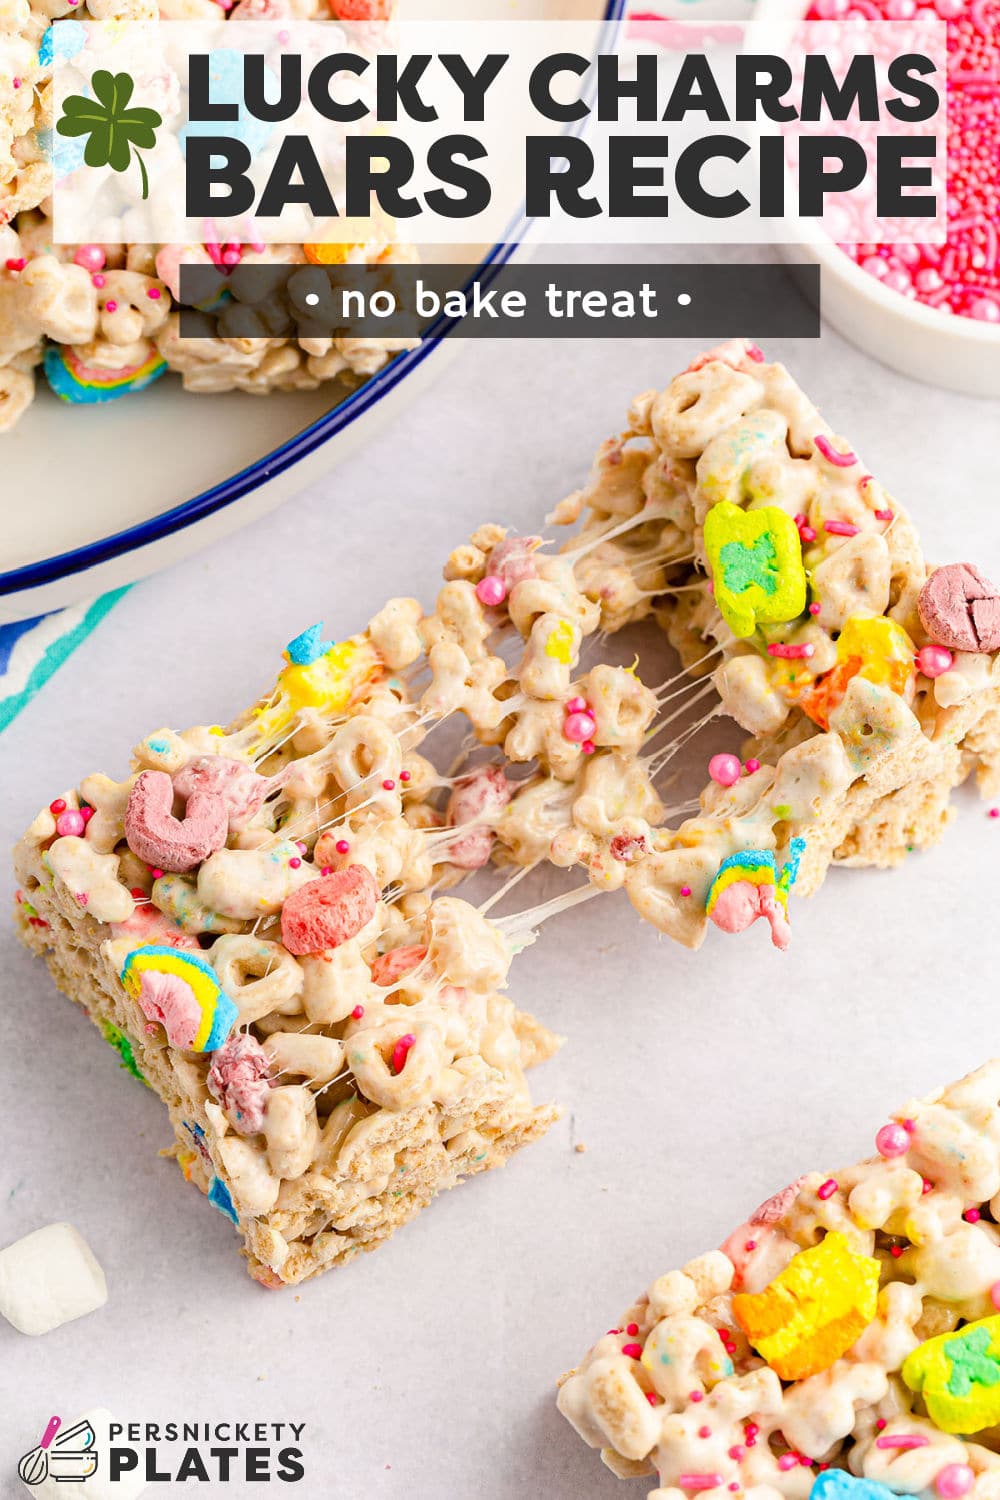 Lucky charms treats are a no bake dessert made with 15 minutes of prep time using everyone's favorite cereal! They're loaded with colorful lucky charms and melty marshmallows set into festive, chewy, gooey squares that are perfect for all your St. Patrick's Day dessert trays! | www.persnicketyplates.com